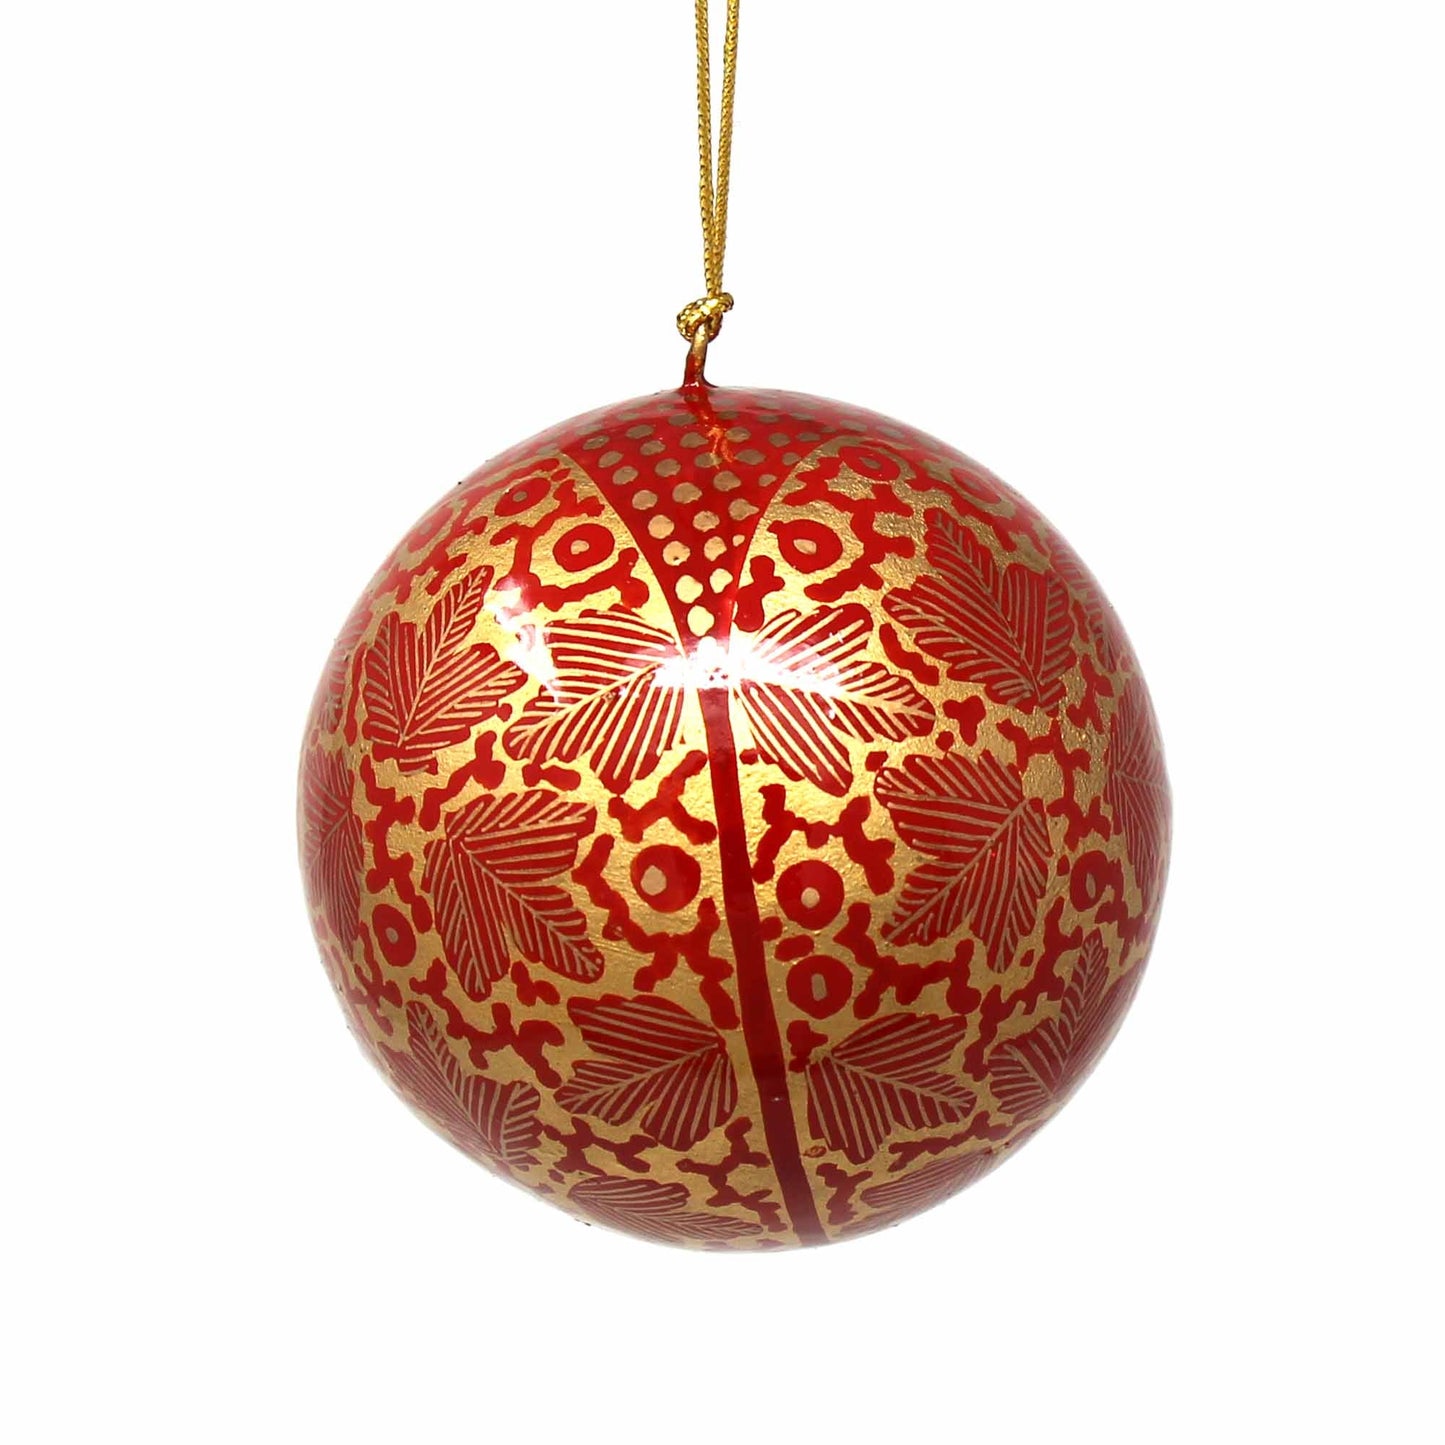 Handpainted Ornament Gold Chinar Leaves